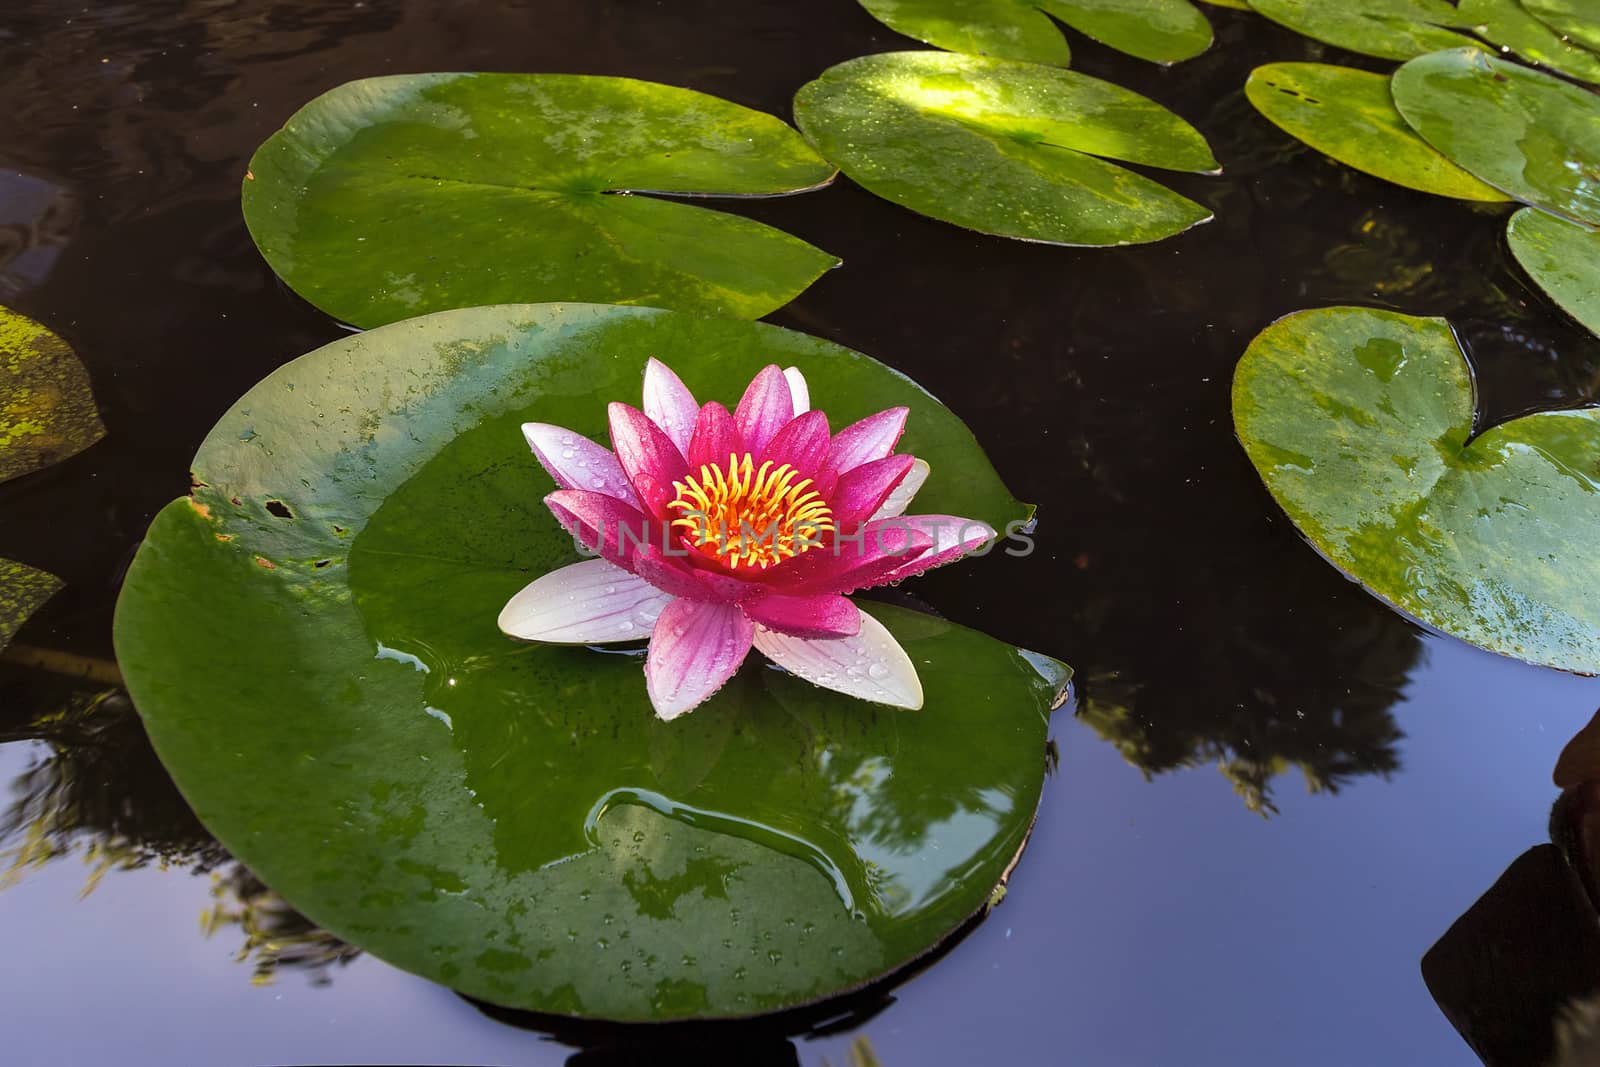 Pink Water Lily flowers in bloom with lilypad in garden backyard pond